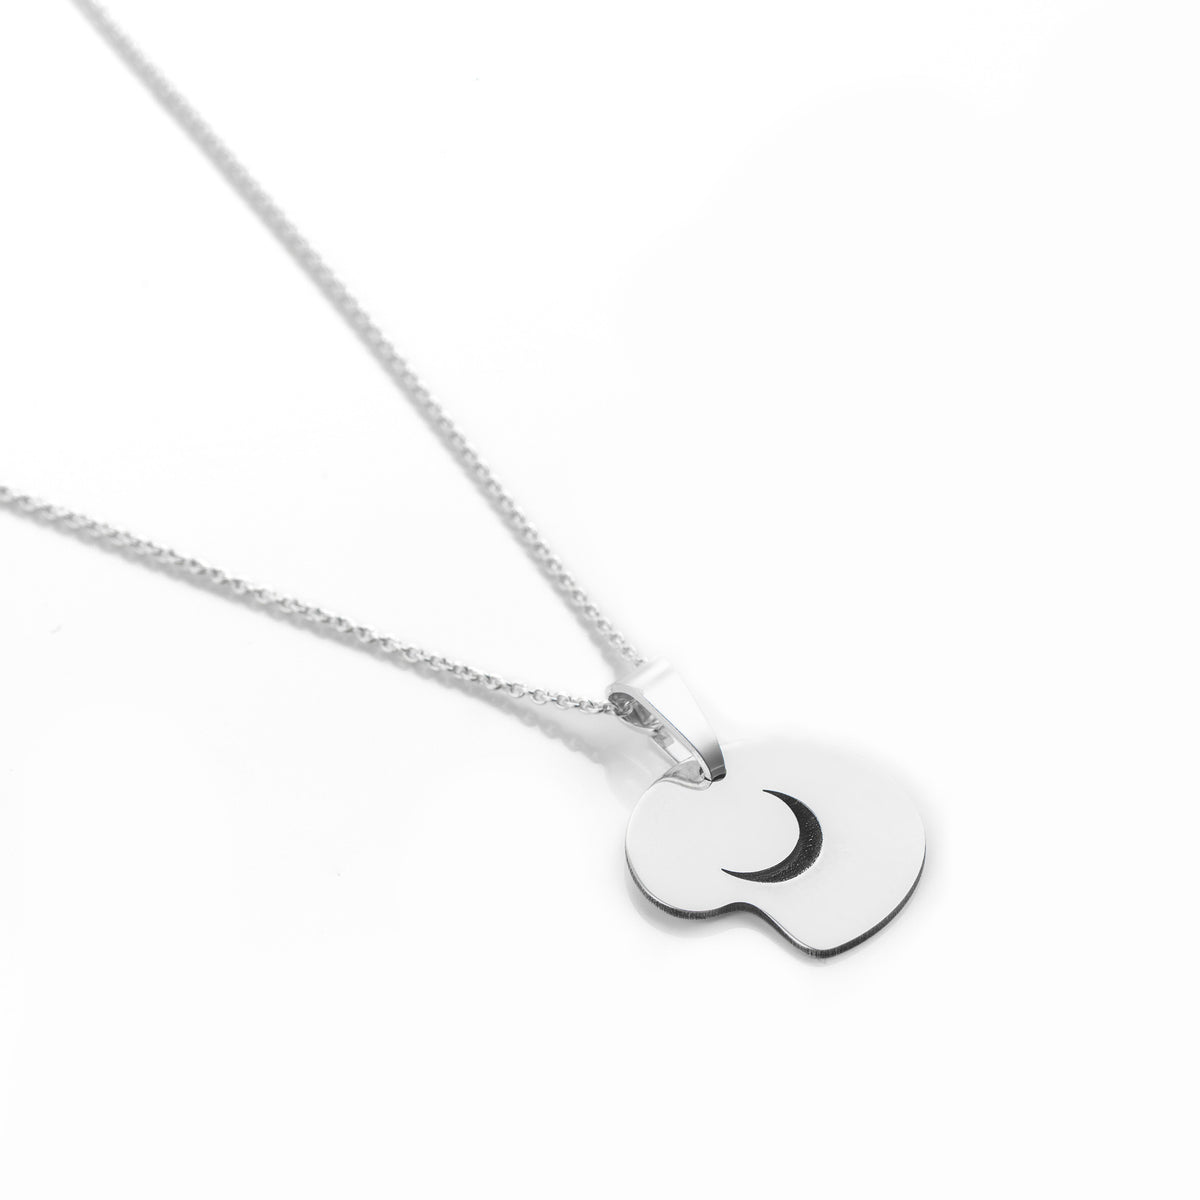 Lost in Dreams Necklace, 925 sterling silver